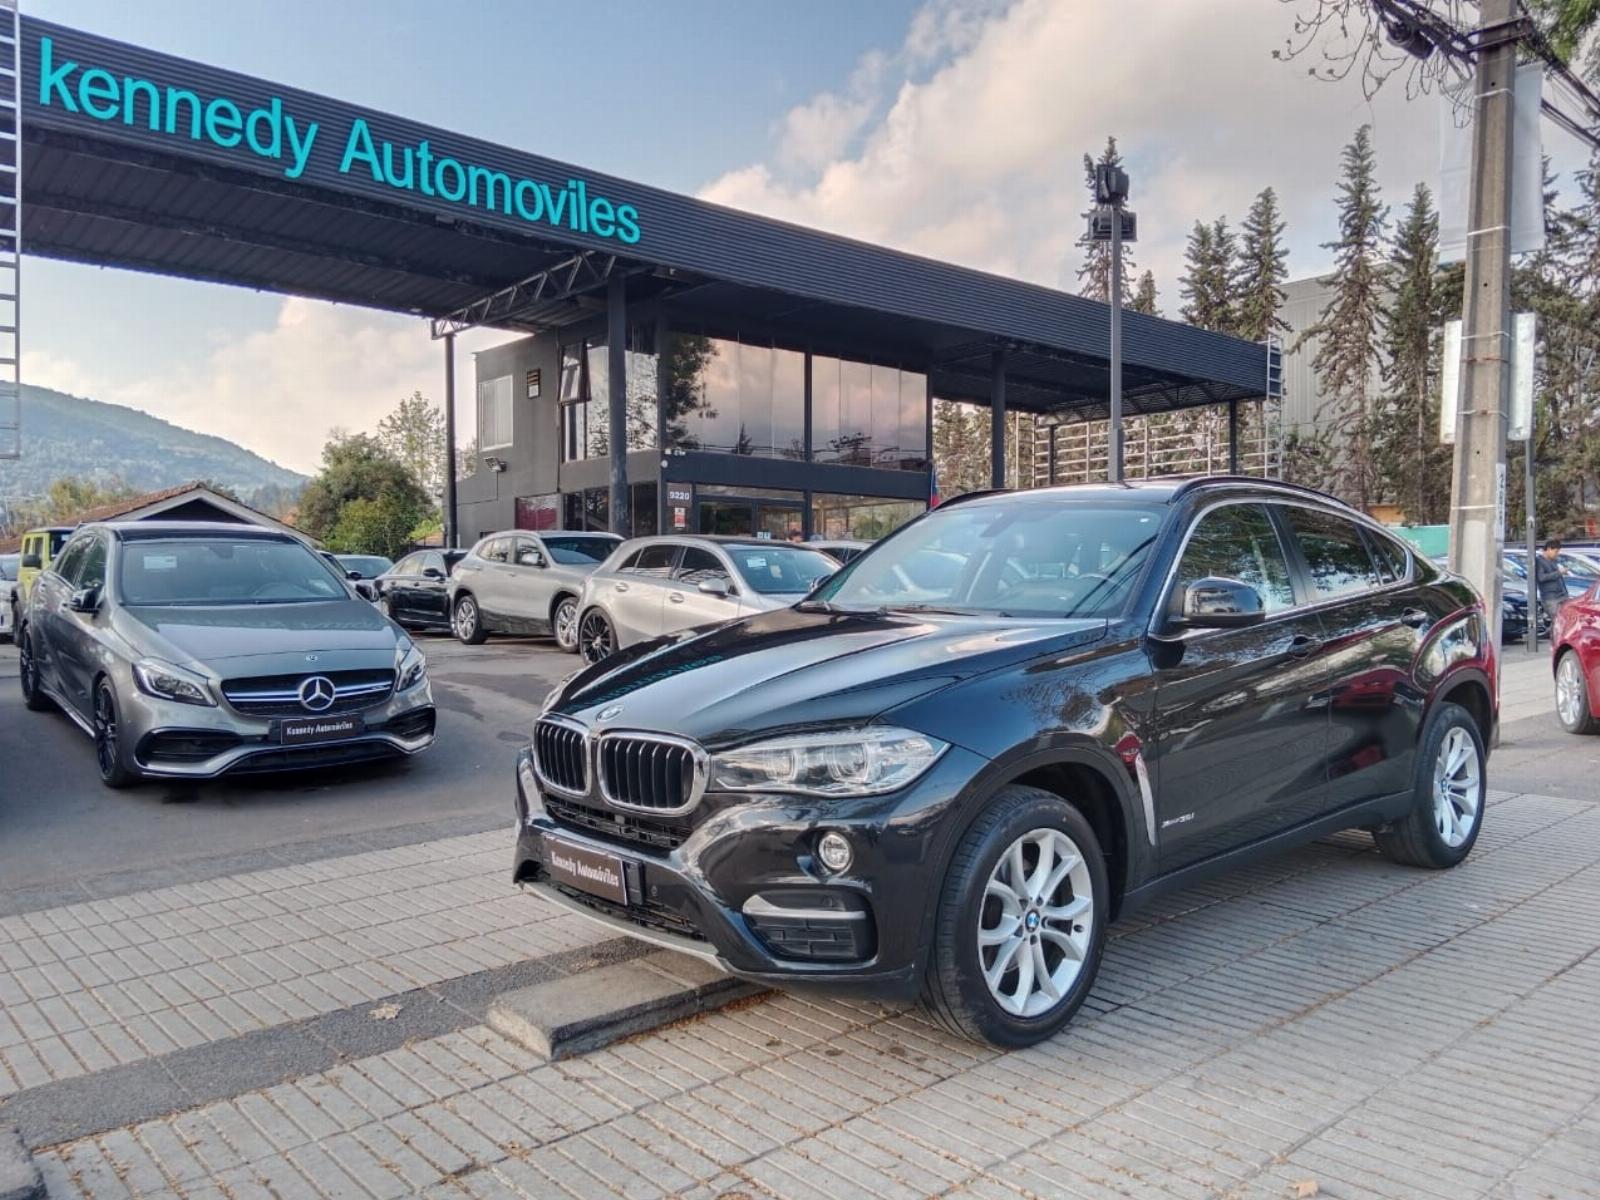 BMW X6 3.0 XDrive35I A 2018 Impecable - KENNEDY AUTOMOVILES